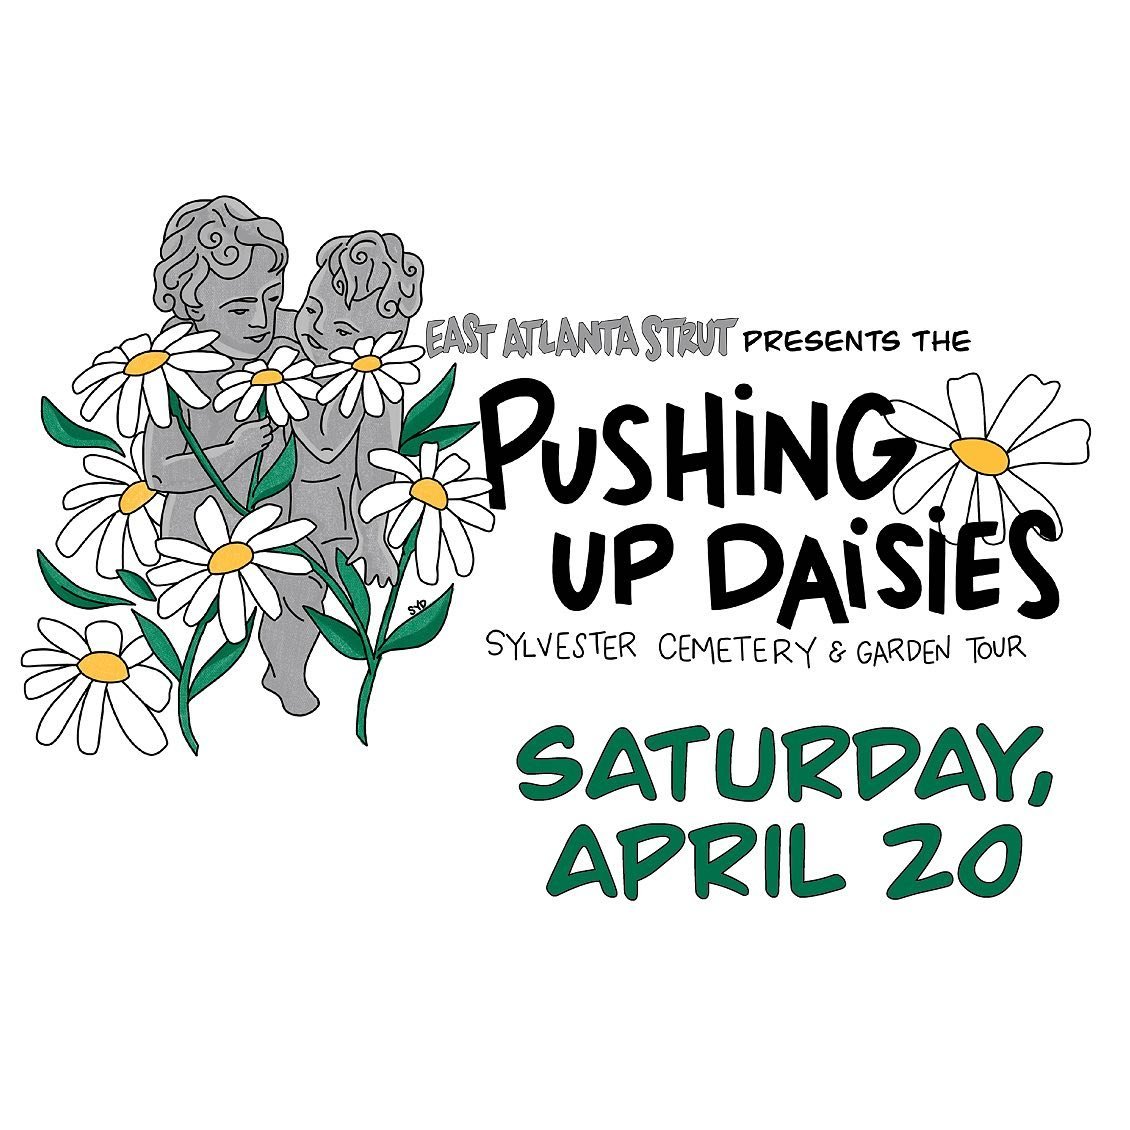 Don&rsquo;t miss @eavstrut&rsquo;s Pushing Up Daisies Garden Tour tomorrow! From 11 a.m. to 3 p.m., wander through gardens and cemetery, then settle in with your lawn chair or blanket for an afternoon serenade among the tombstones from 3 p.m. to 6 p.